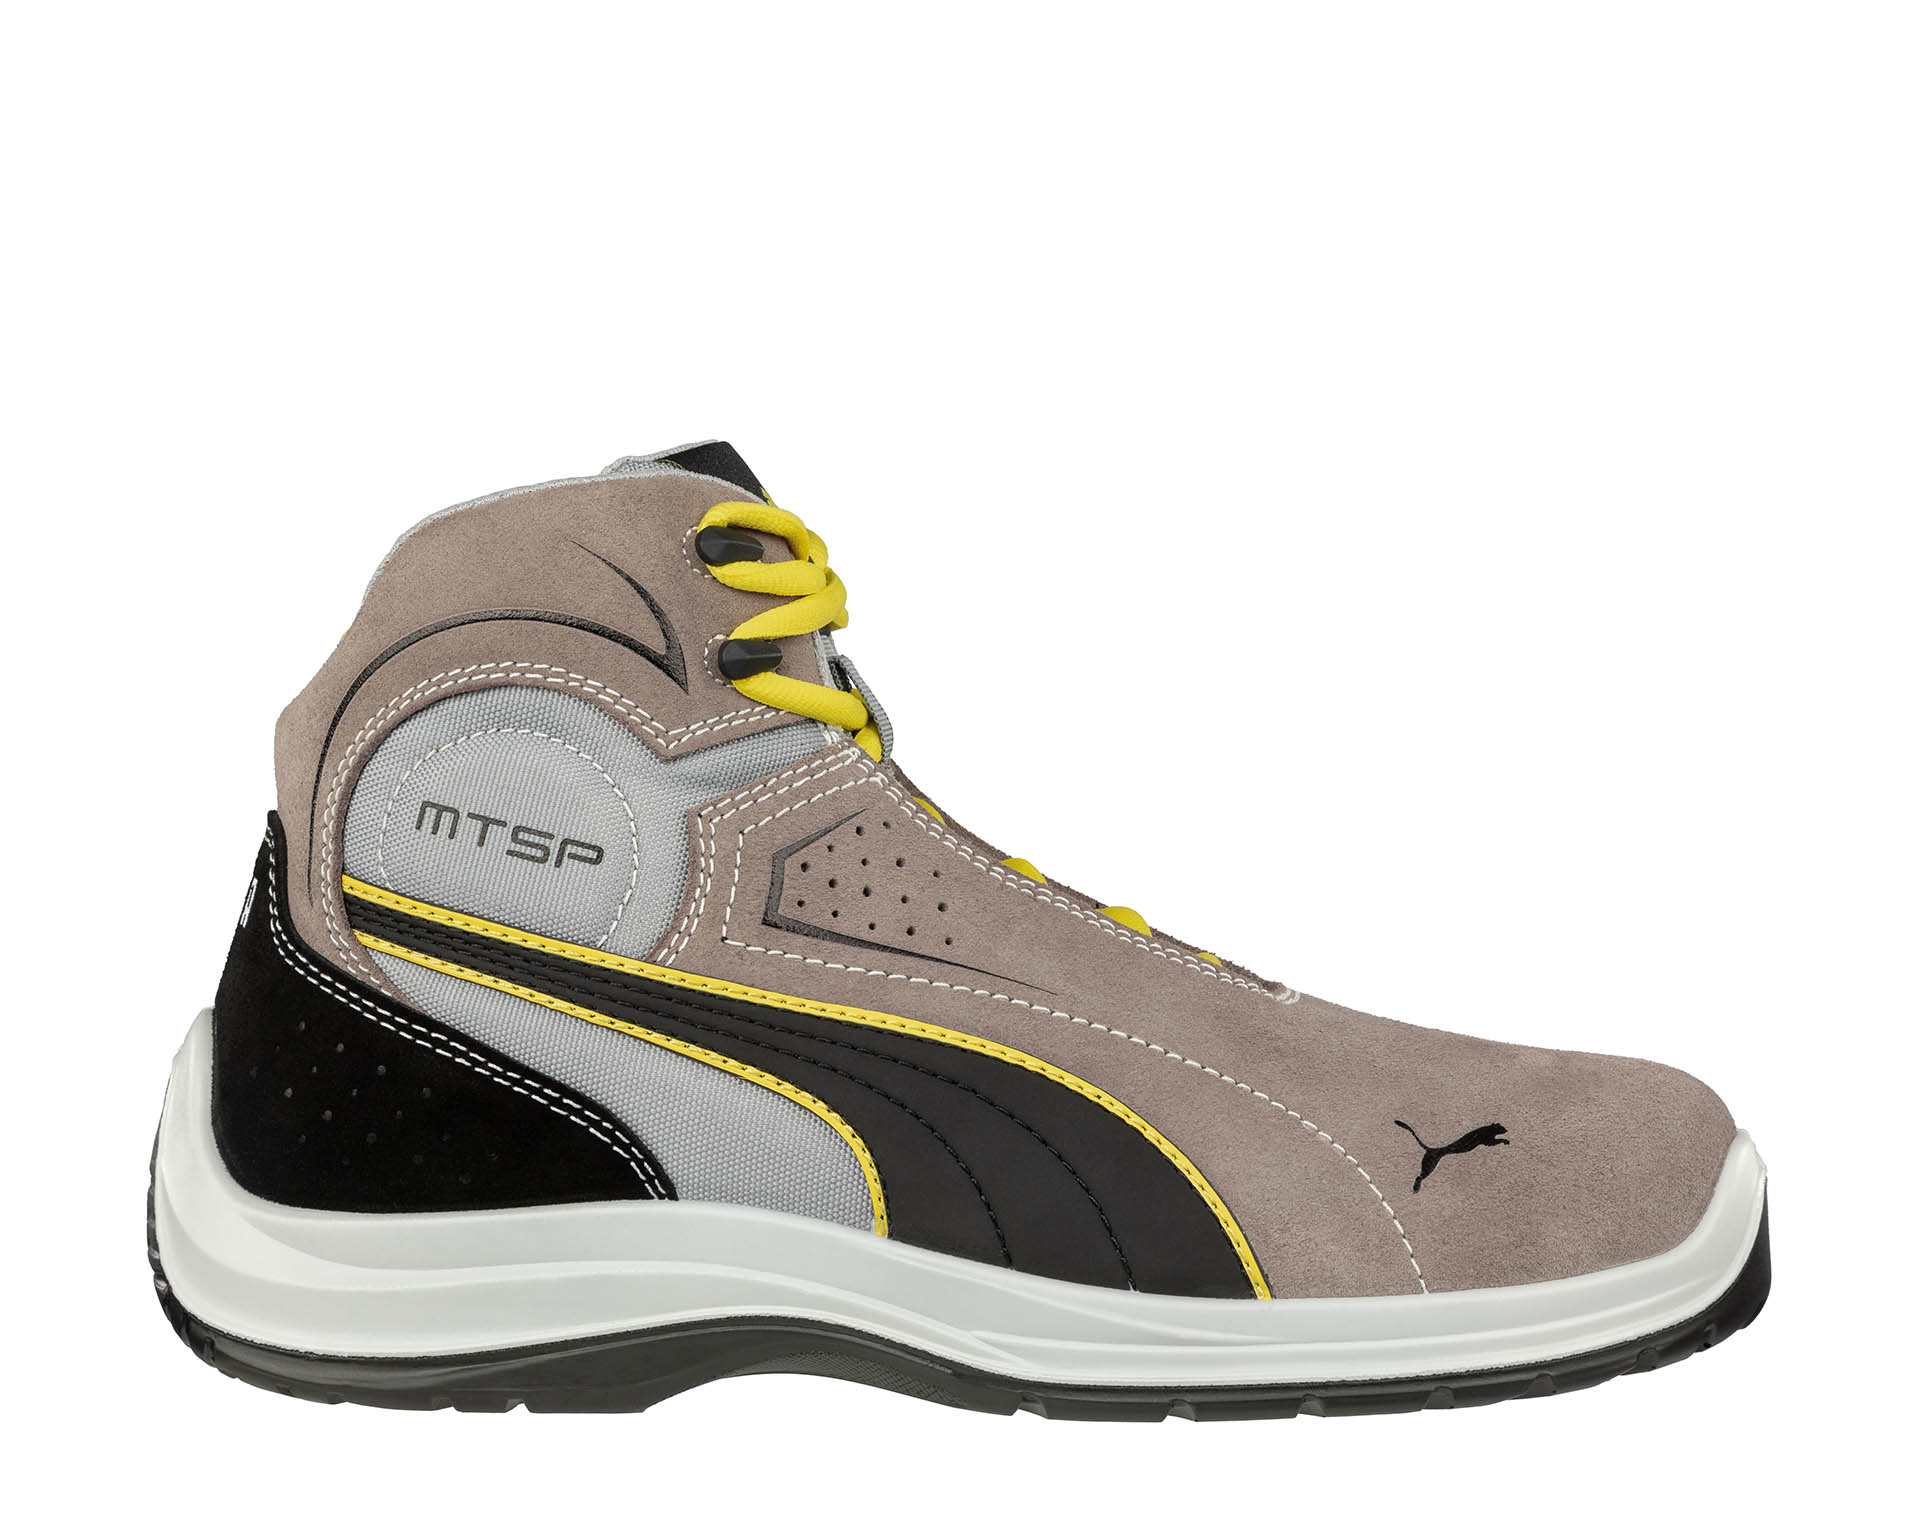 PUMA SAFETY SRC safety shoes STONE MID TOURING English Safety S3 Puma 